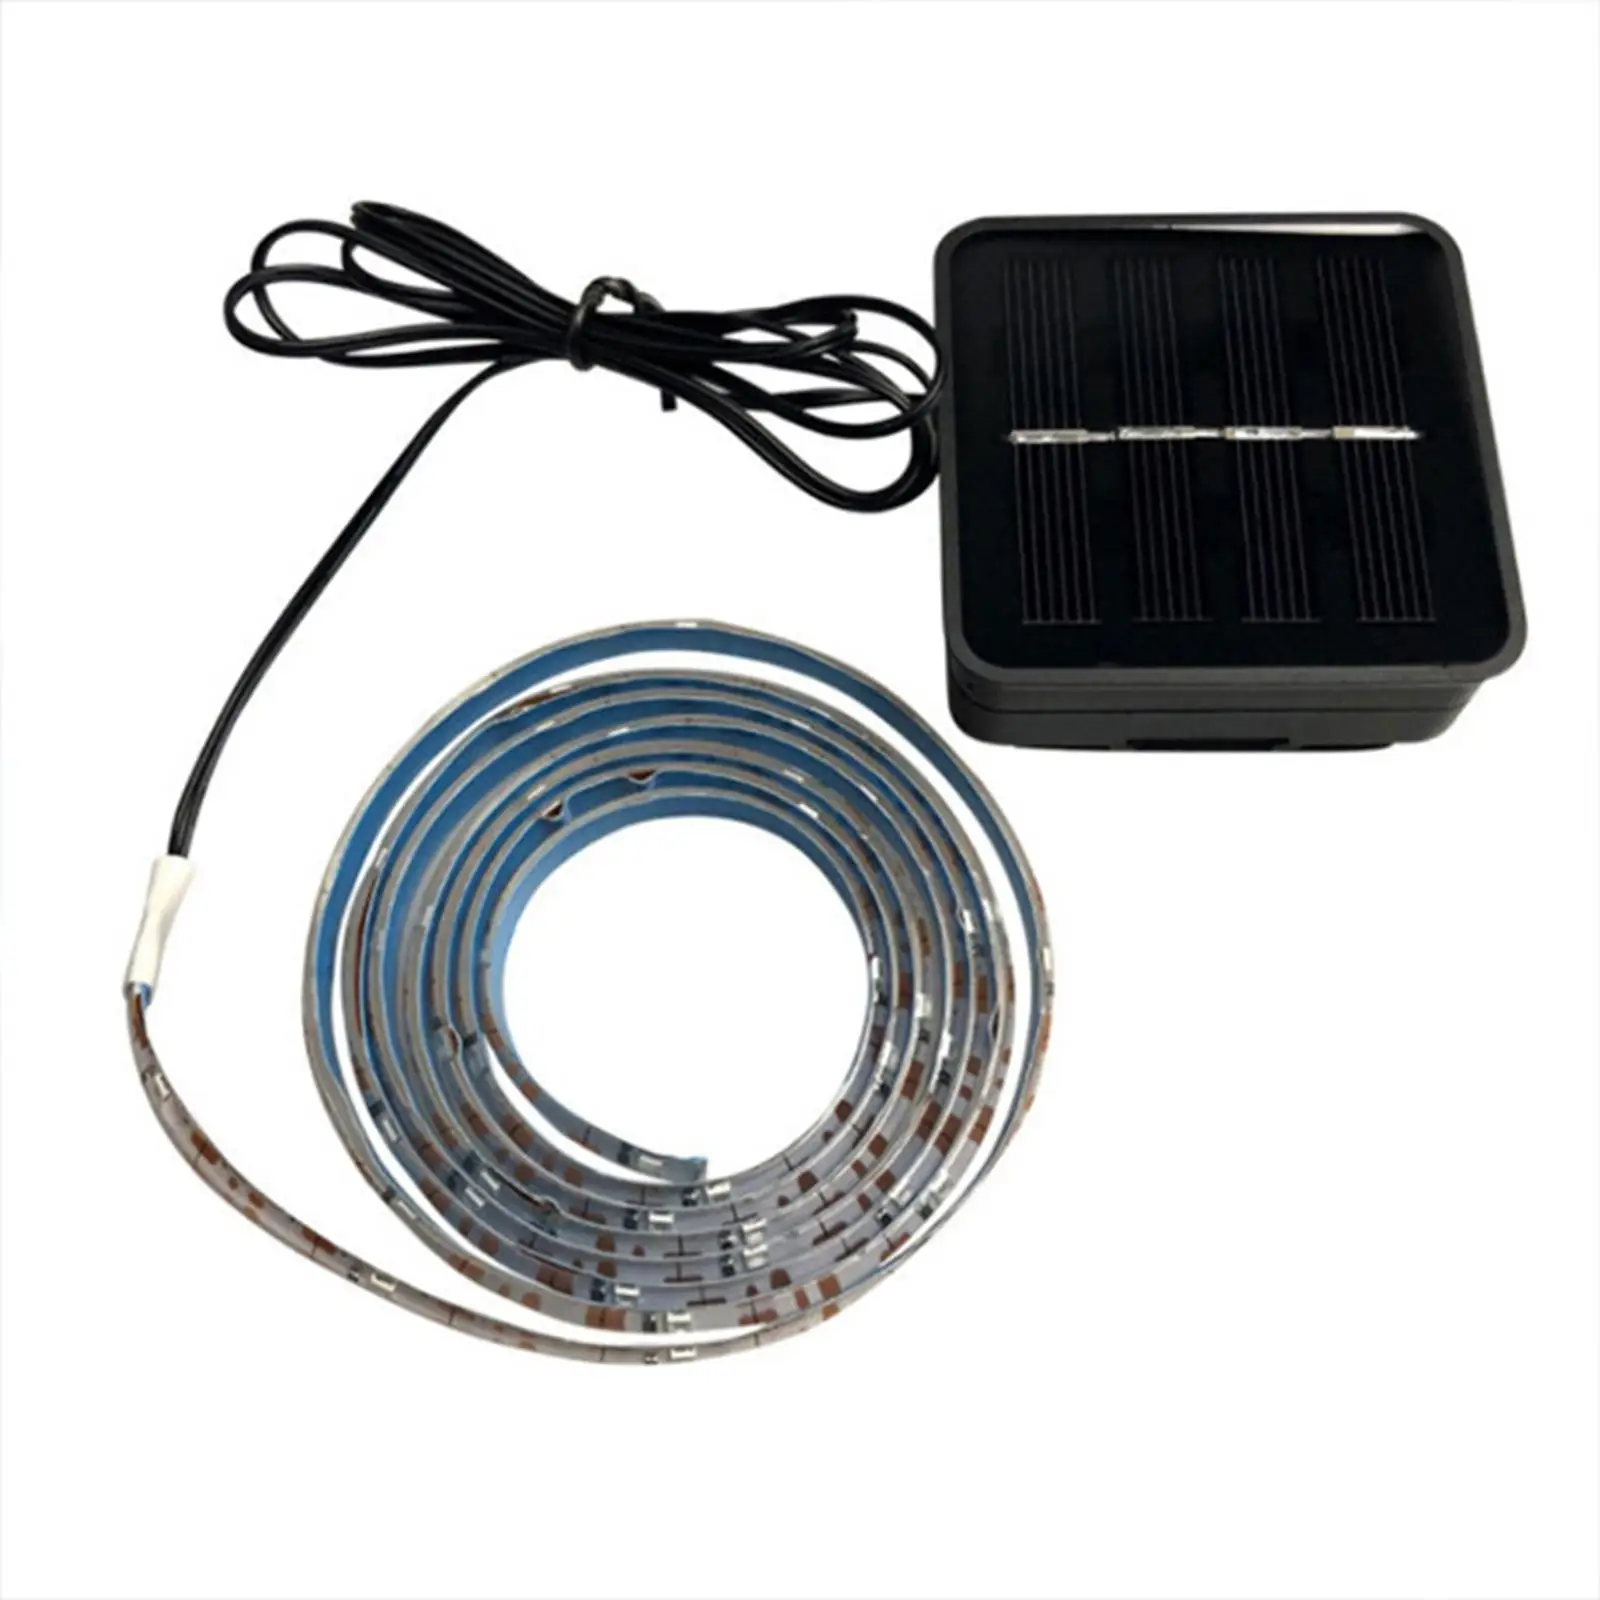 Solar  ,Basketball  , Bright Waterproof RGB LED Strip Lamp for Gardens Sports Basket  Adults Playing at Night